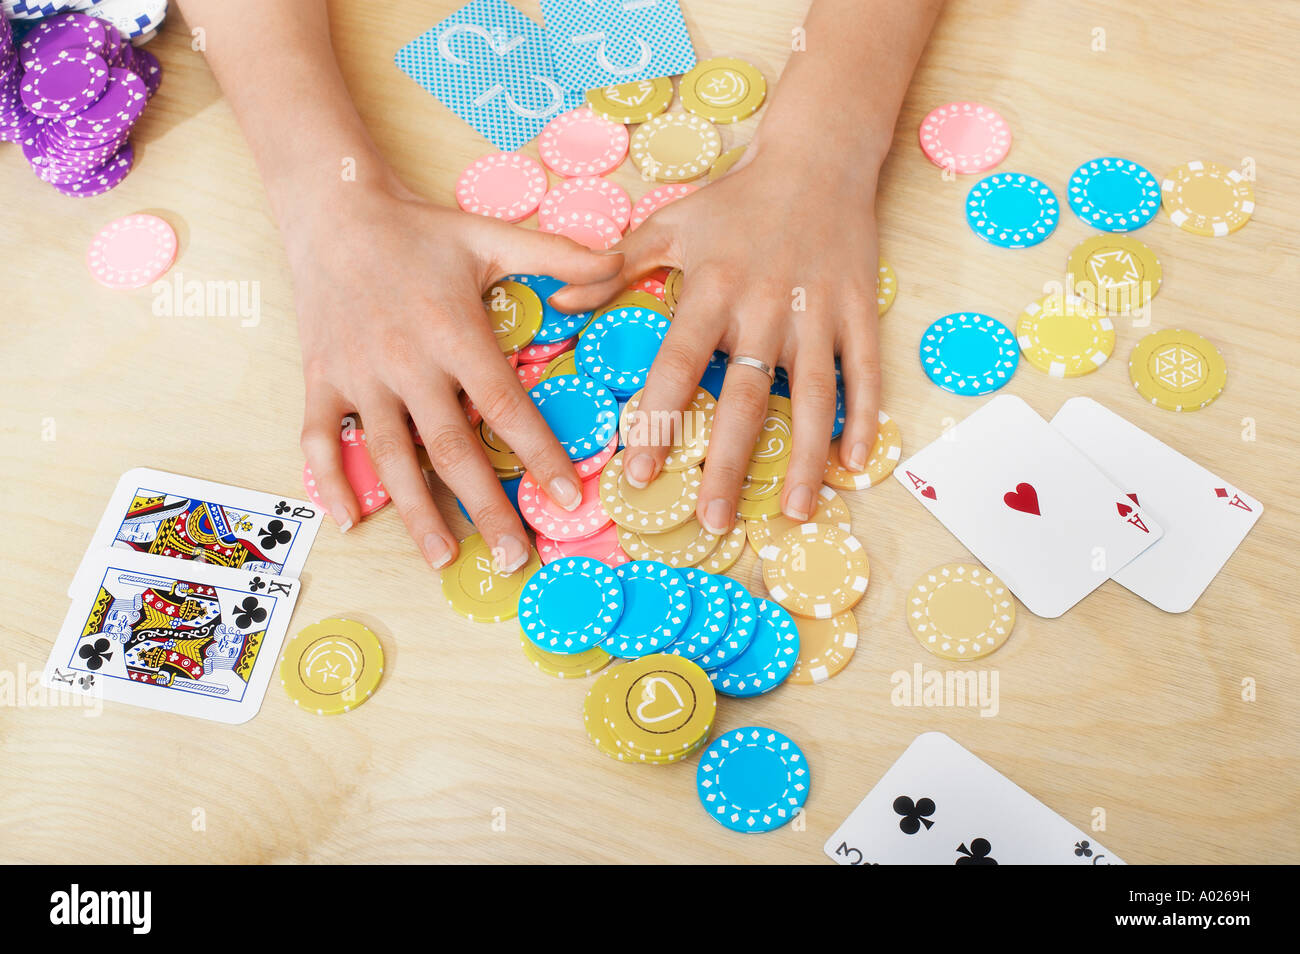 Hands of woman Grabbing Gambling Chips on table, close up of hands, overhead view Stock Photo